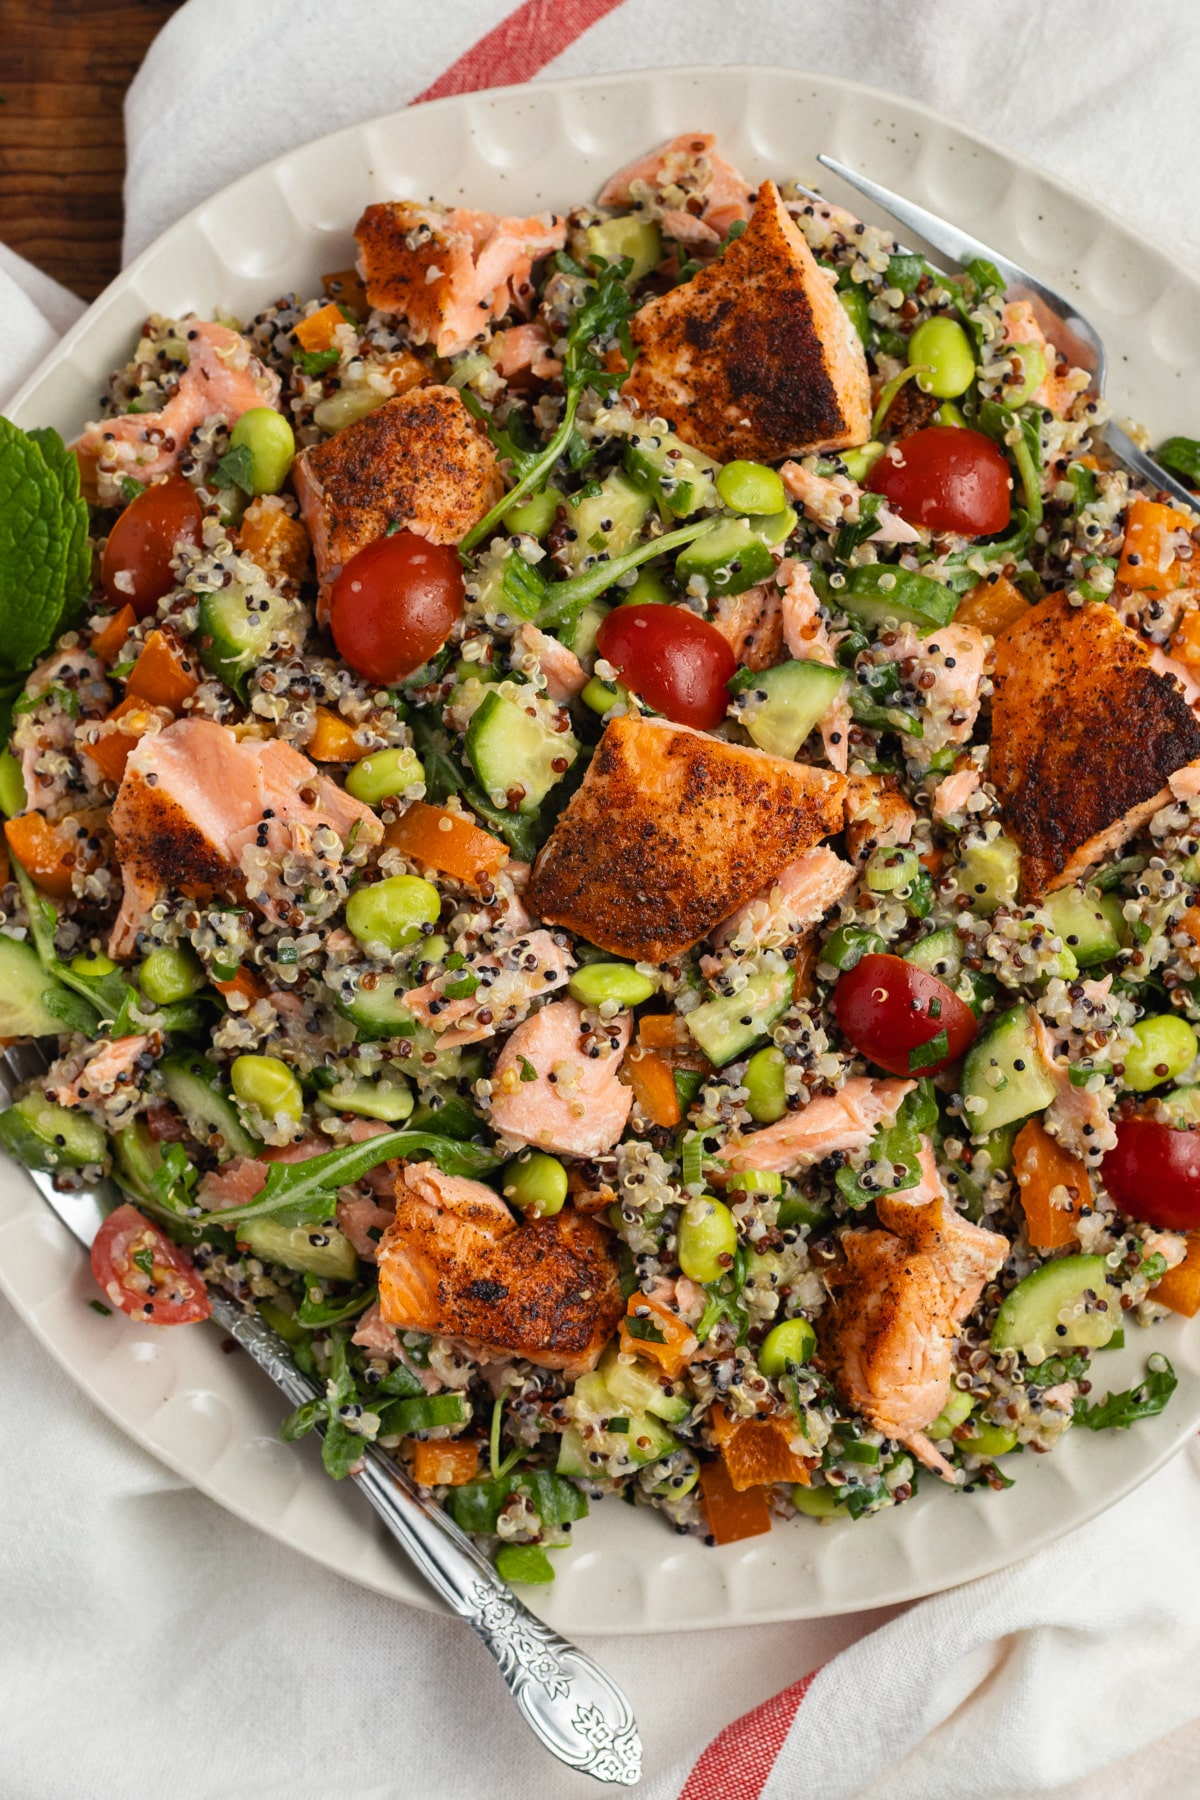 This is a picture of a plate of quinoa salad with chunks of salmon.